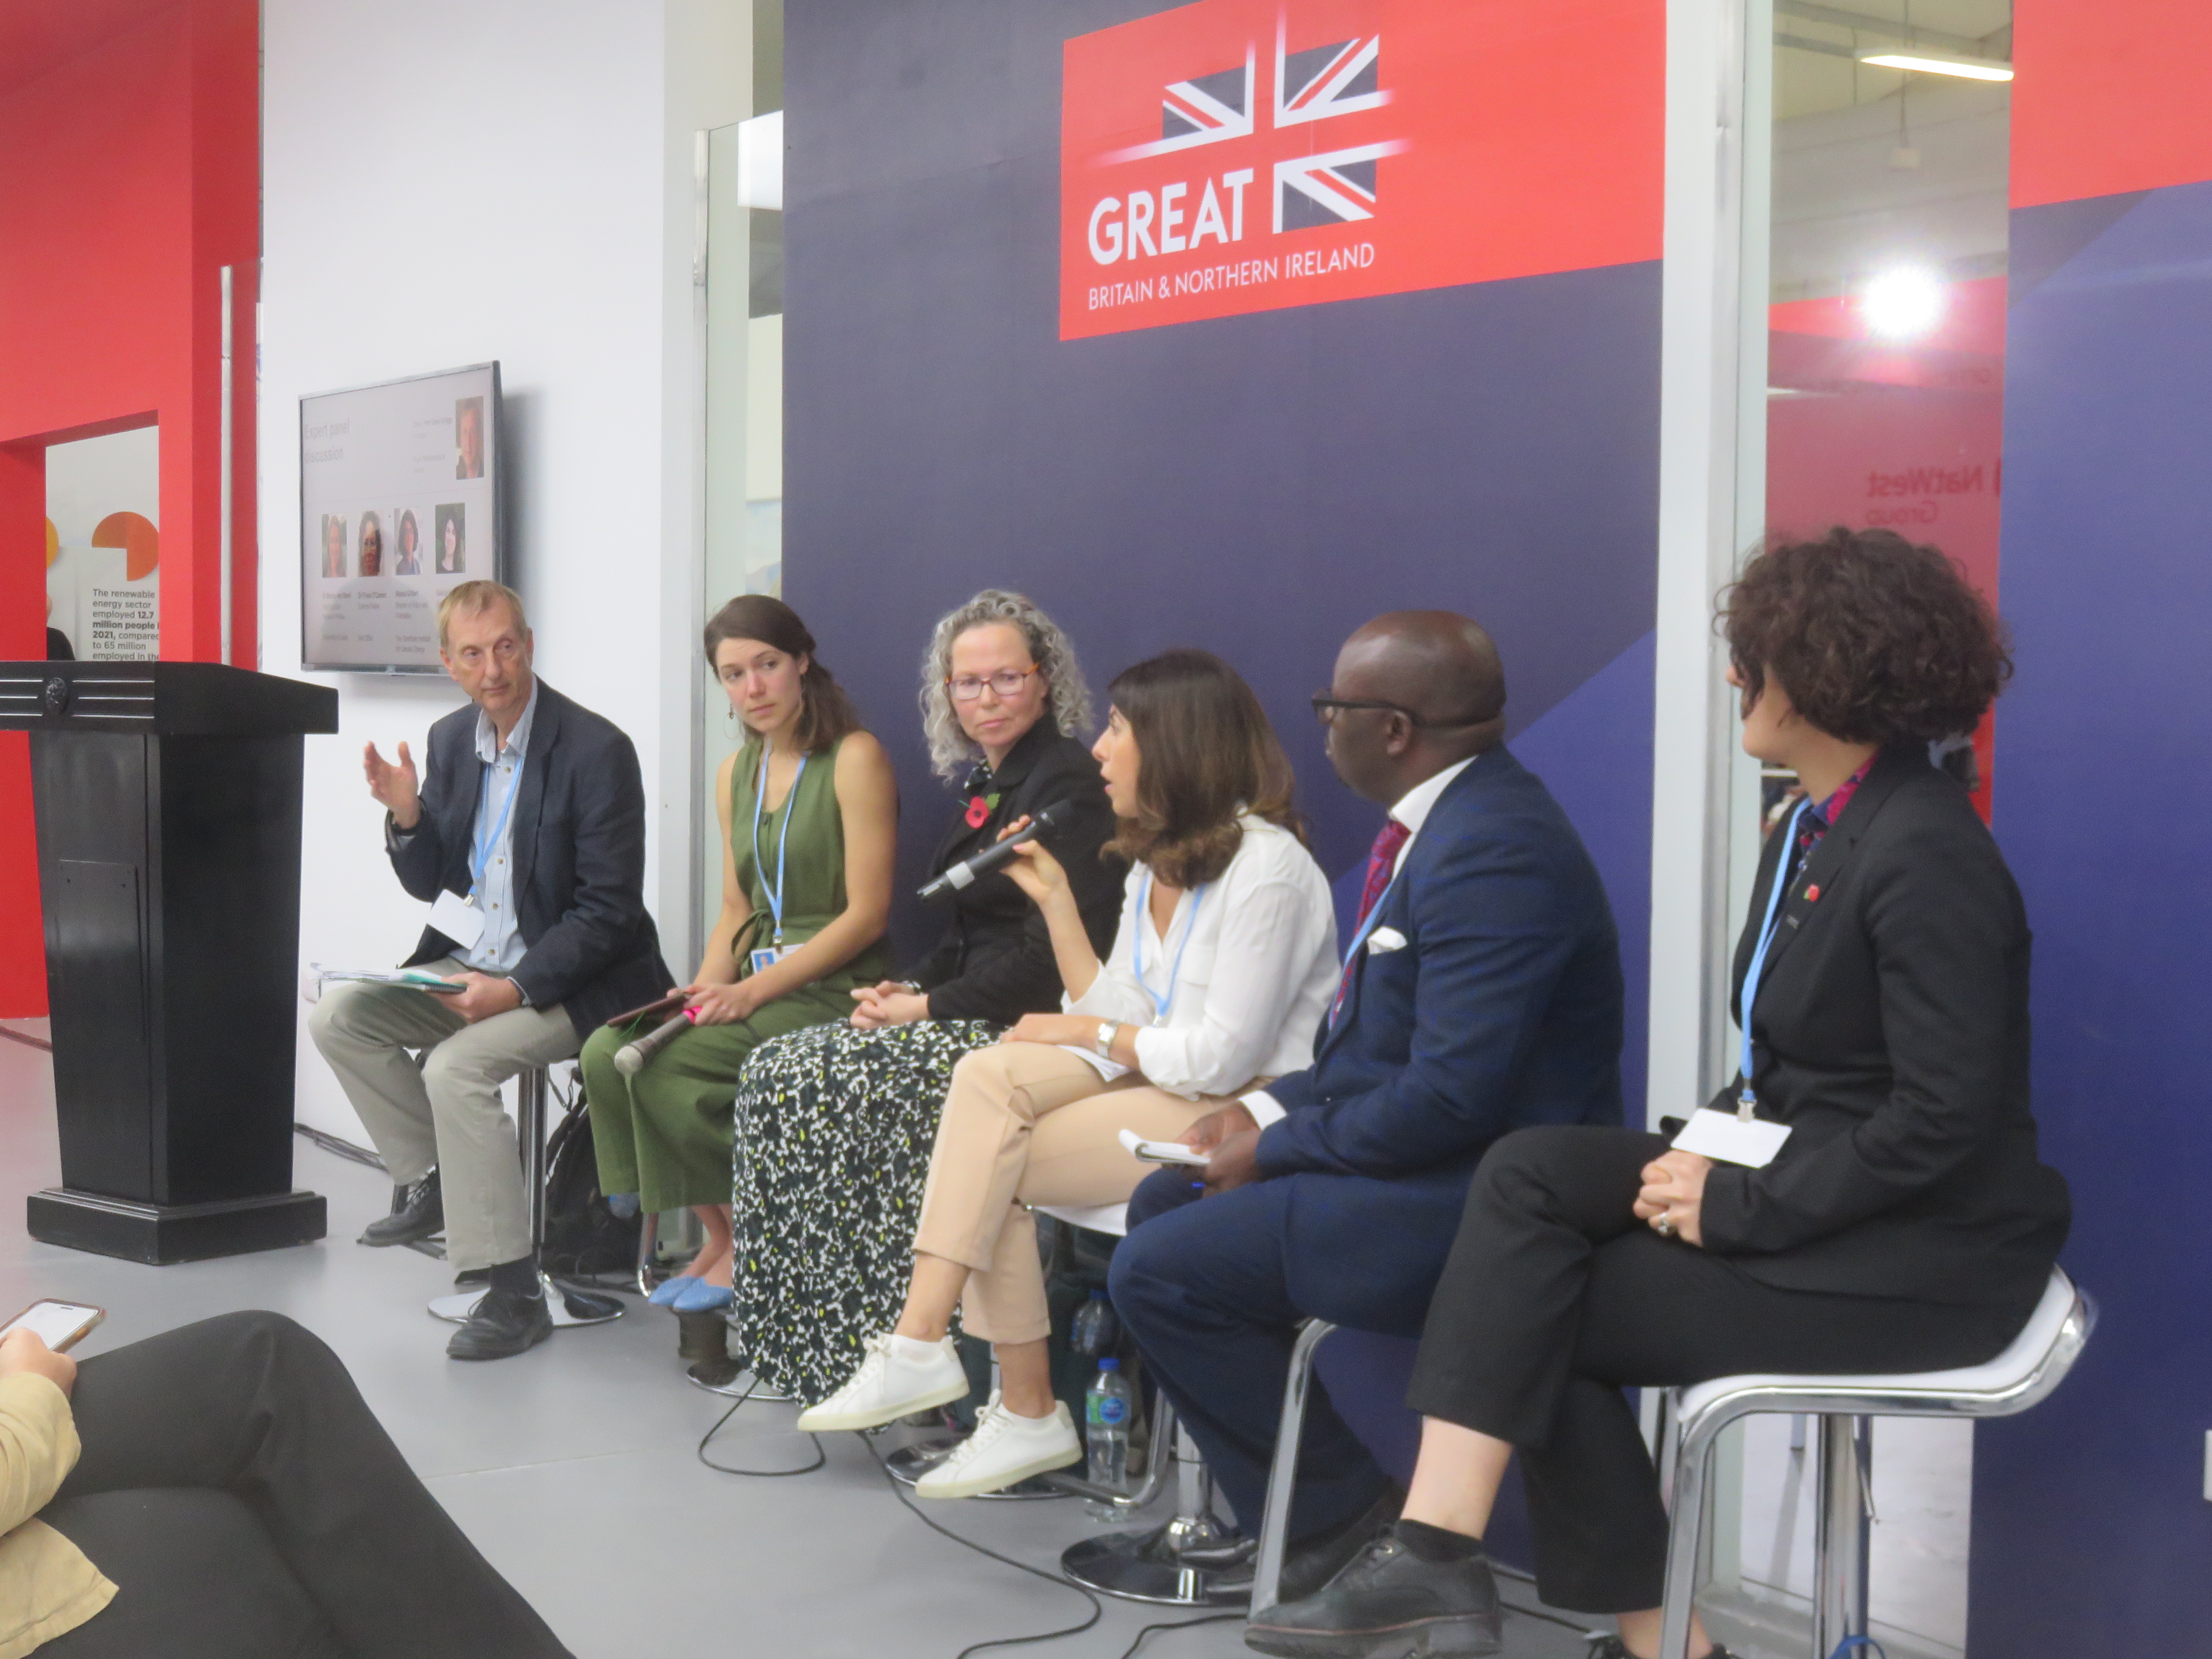 Dave Griggs chairing a co-benefits panel in the UK Pavilion